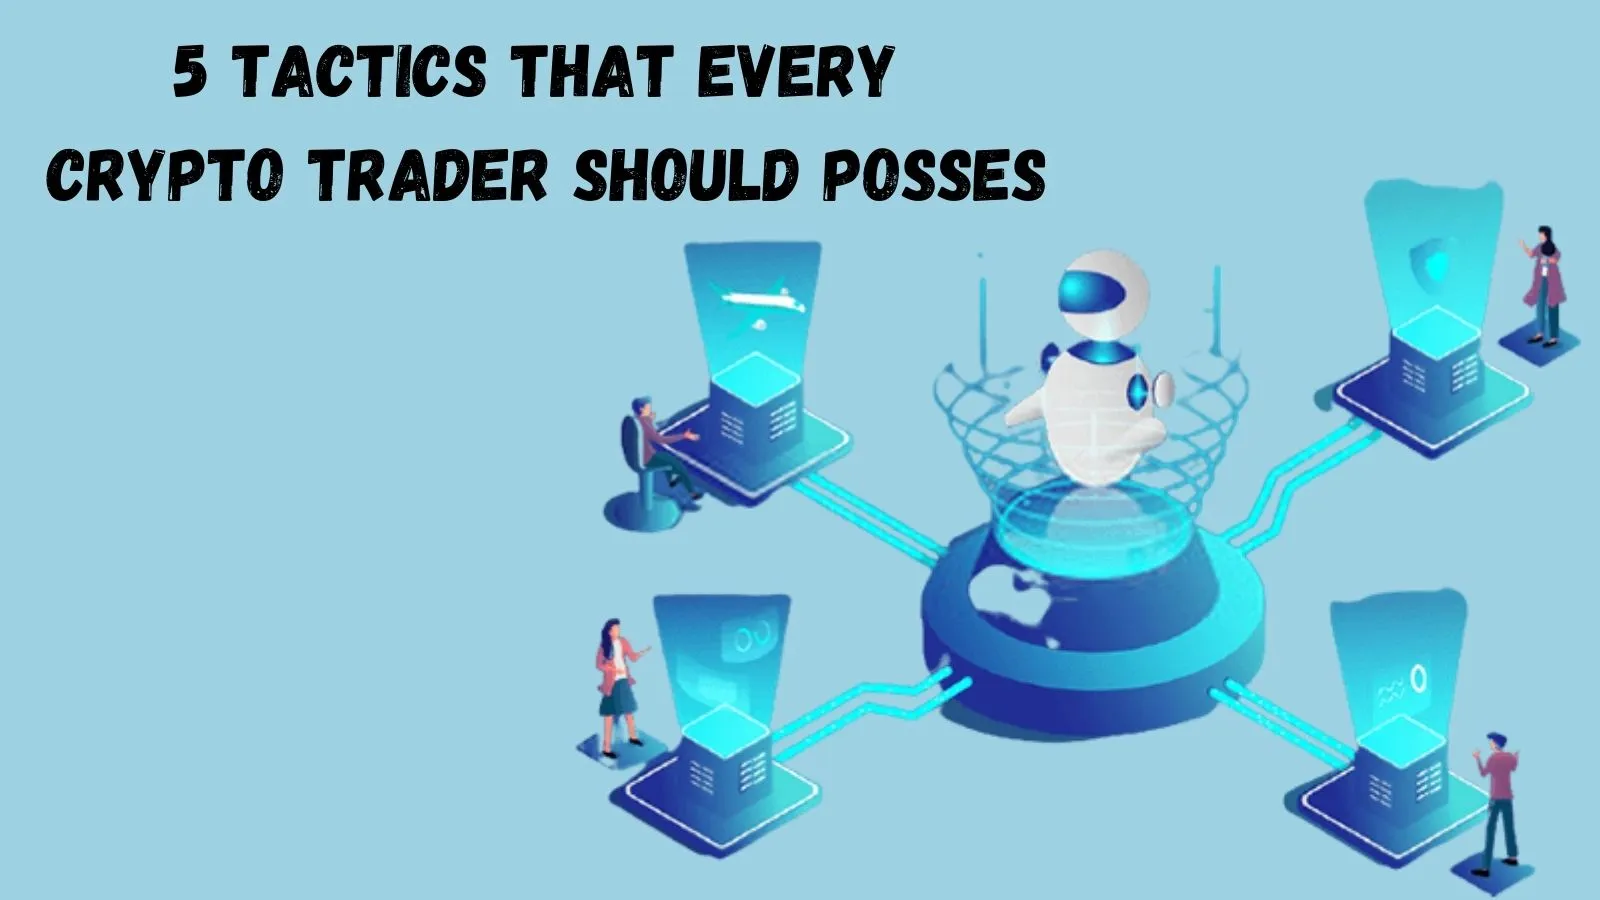 5 Tactics That Every Crypto Trader Should Posses